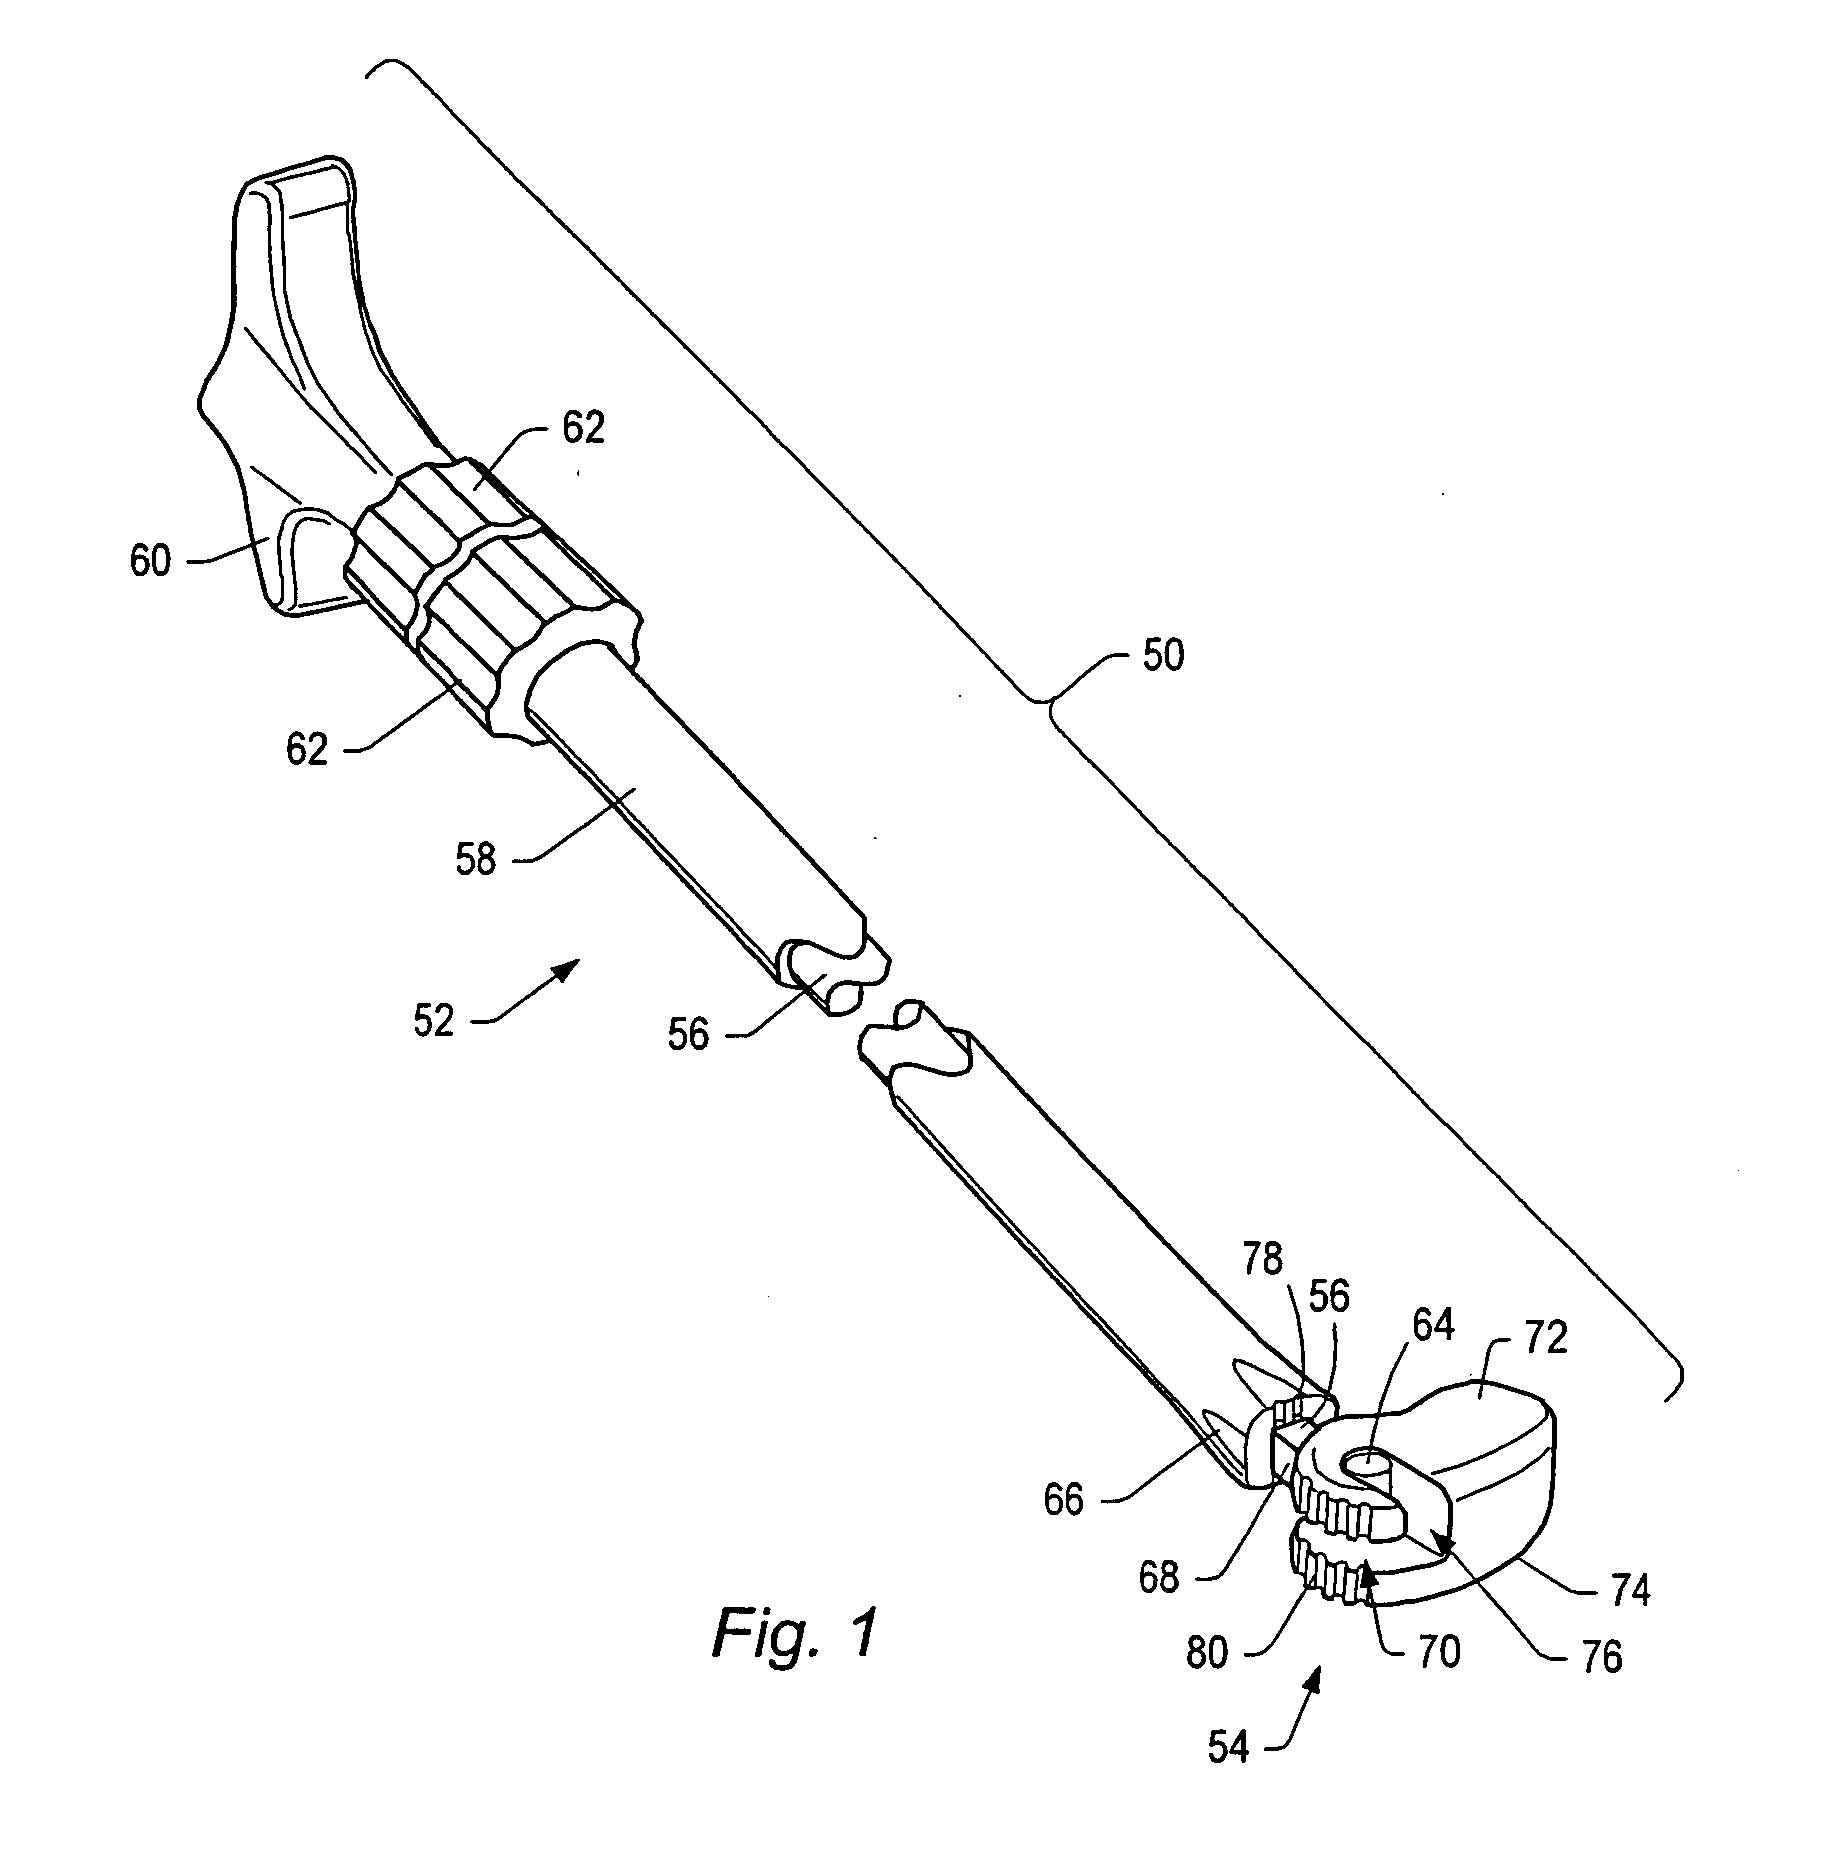 Variable angle spinal surgery instrument